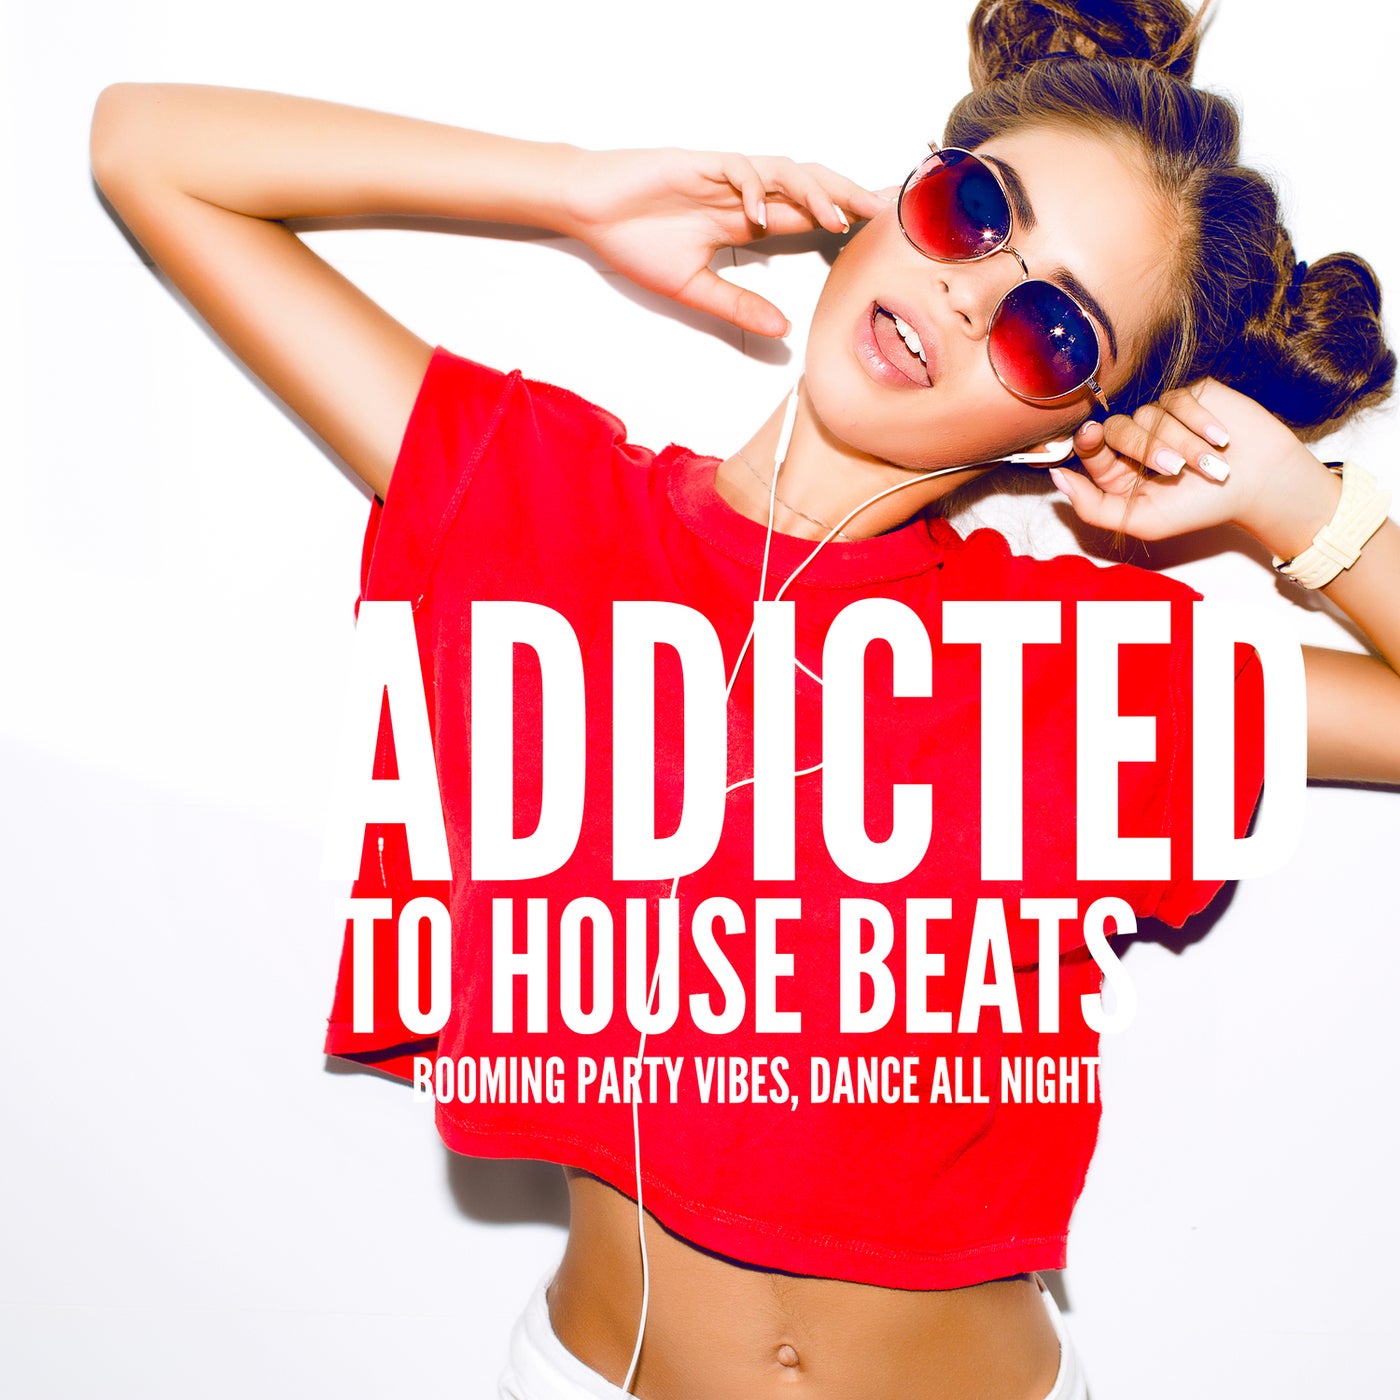 Addicted to House Beats – Booming Party Vibes, Dance All Night